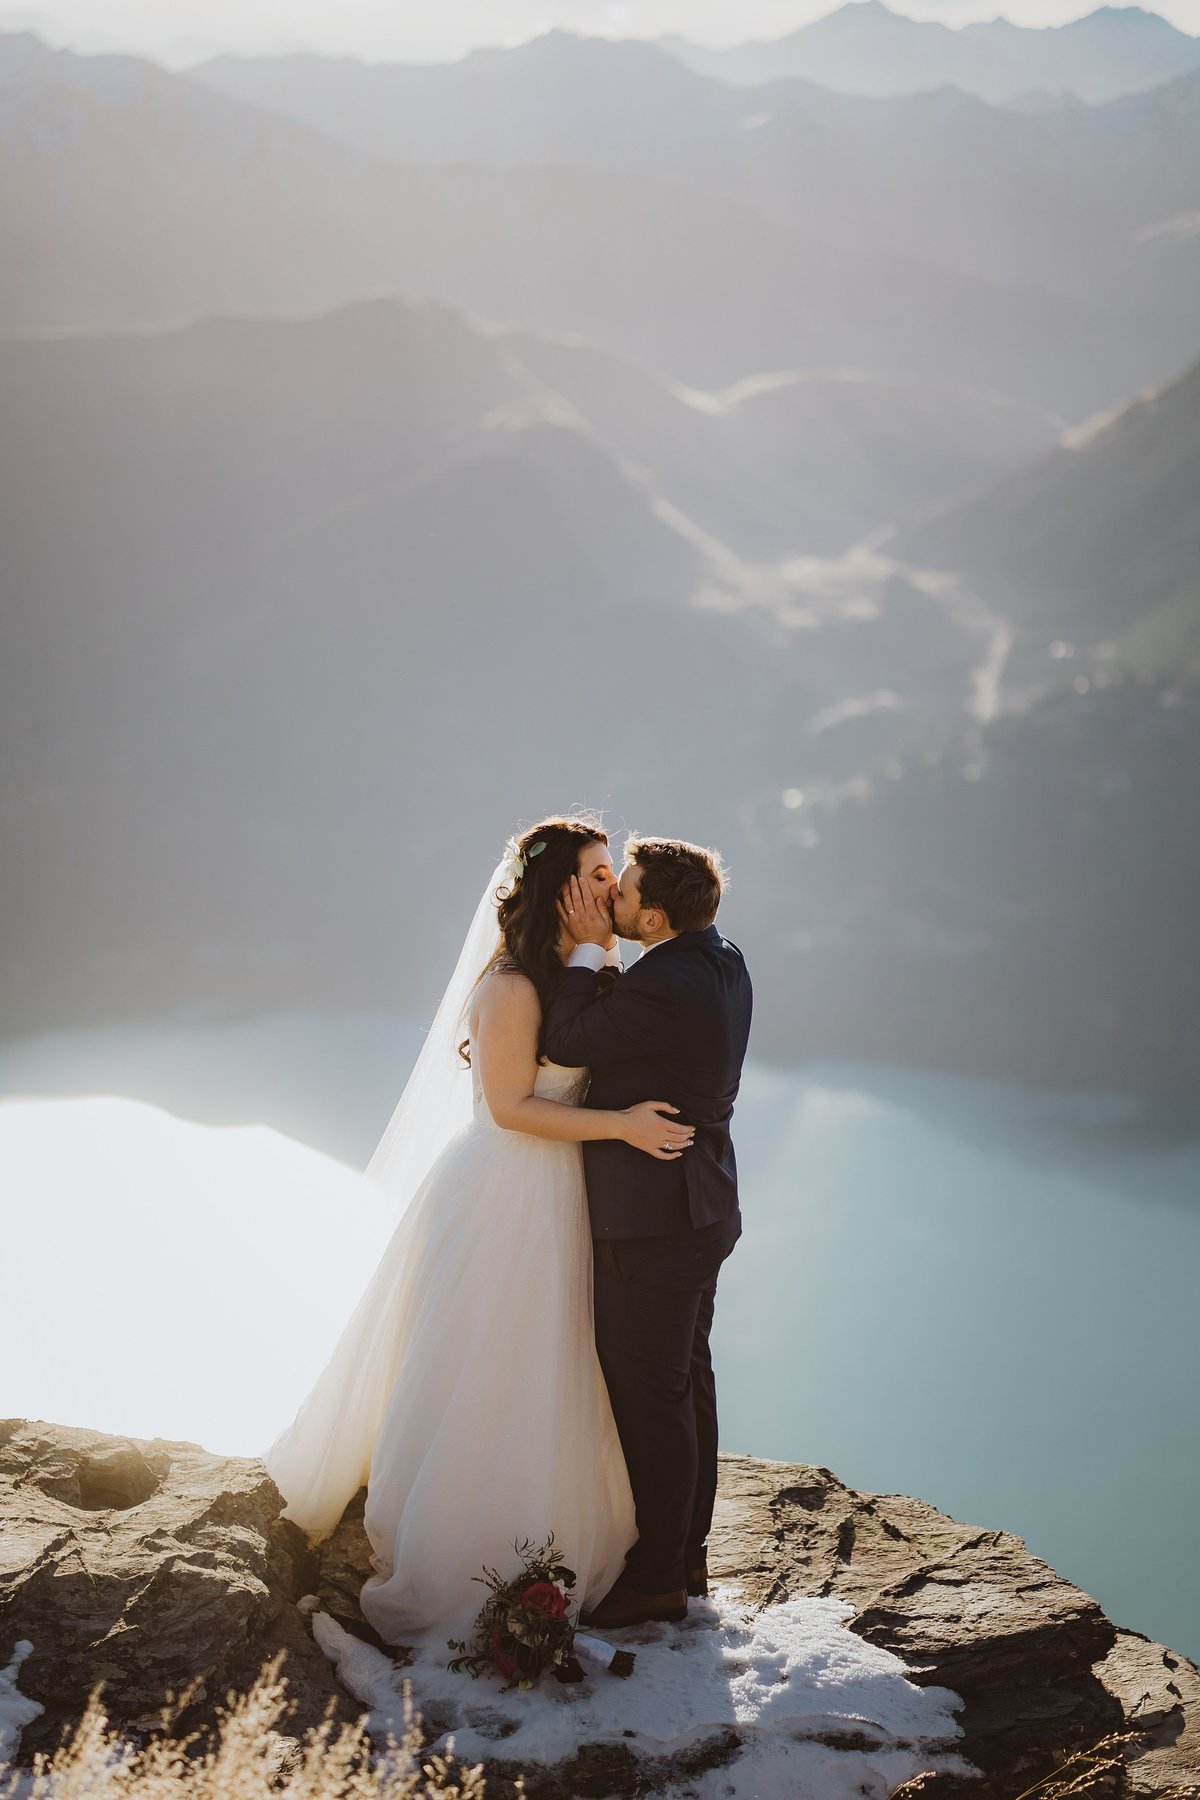 Groom grabbing his bride and kissing her on a cliff edge above a lake